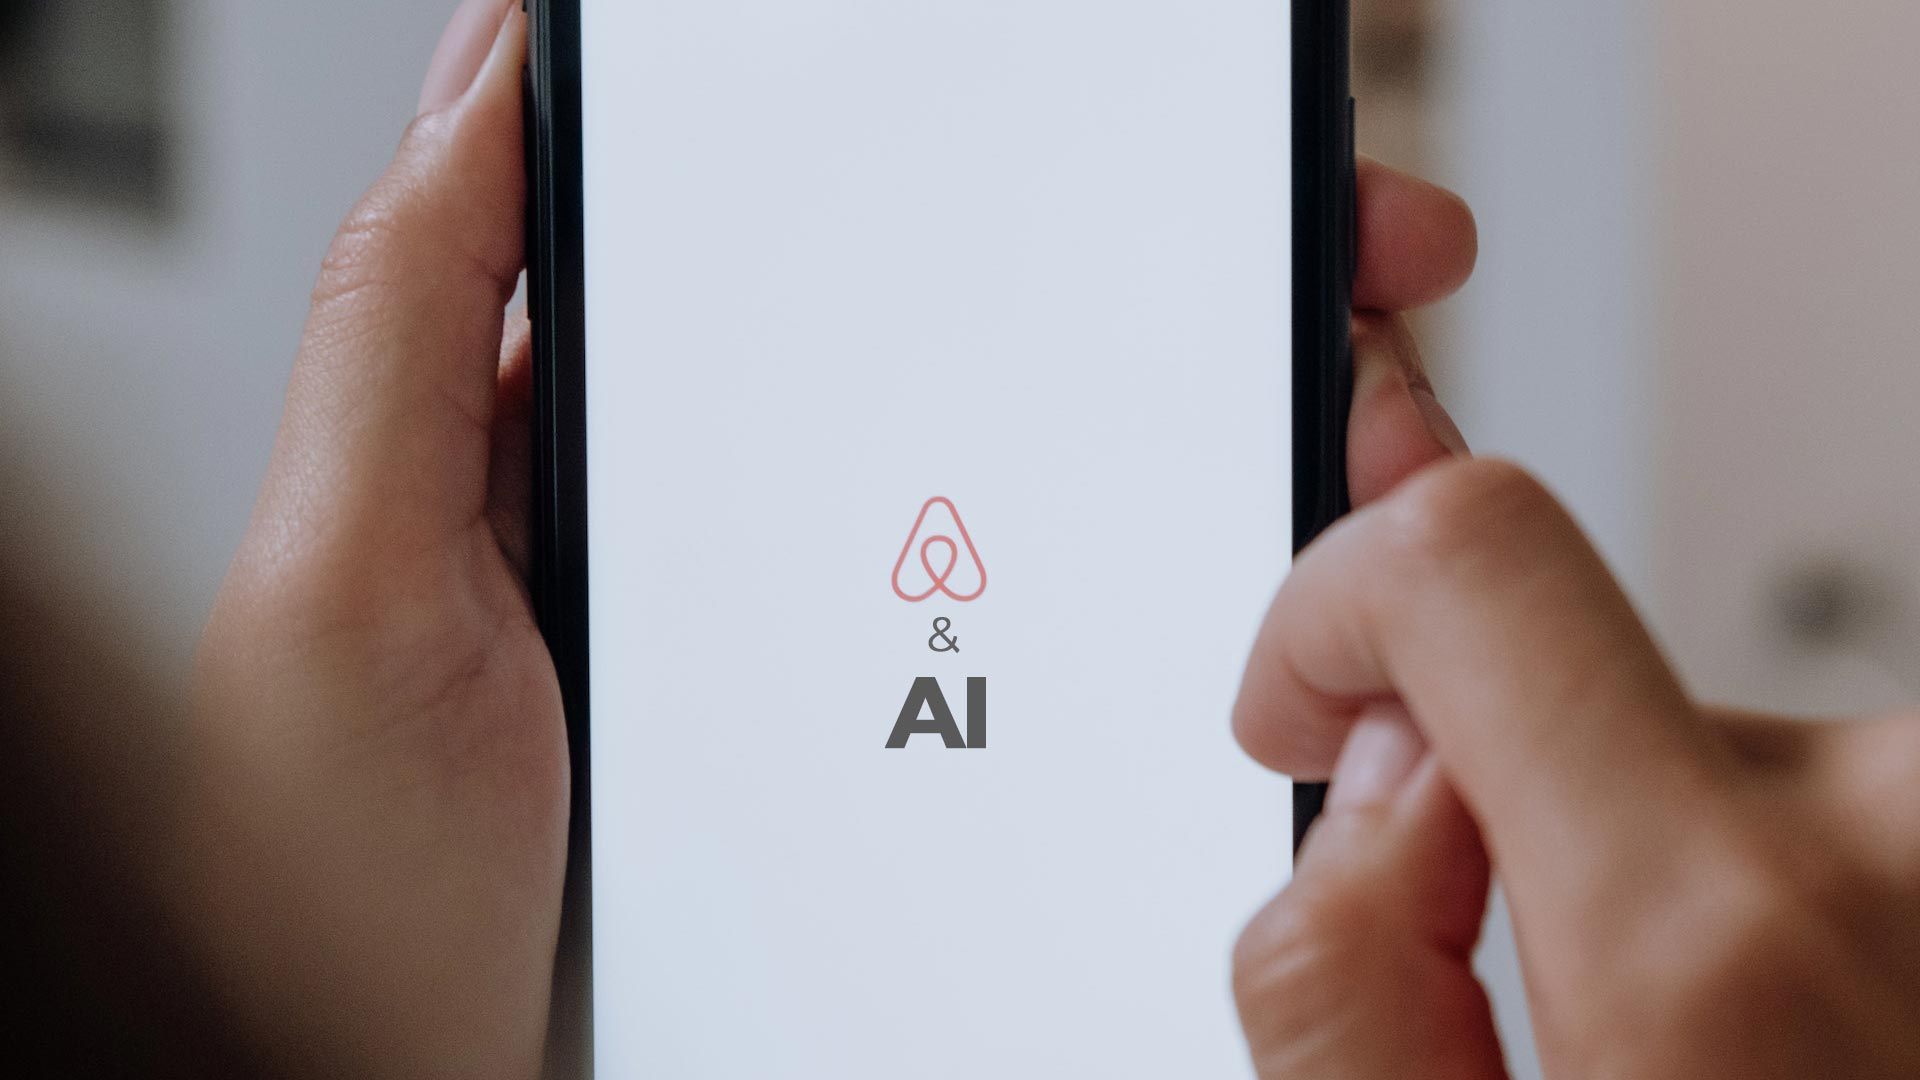 Image by Pexels Airbnb and AI